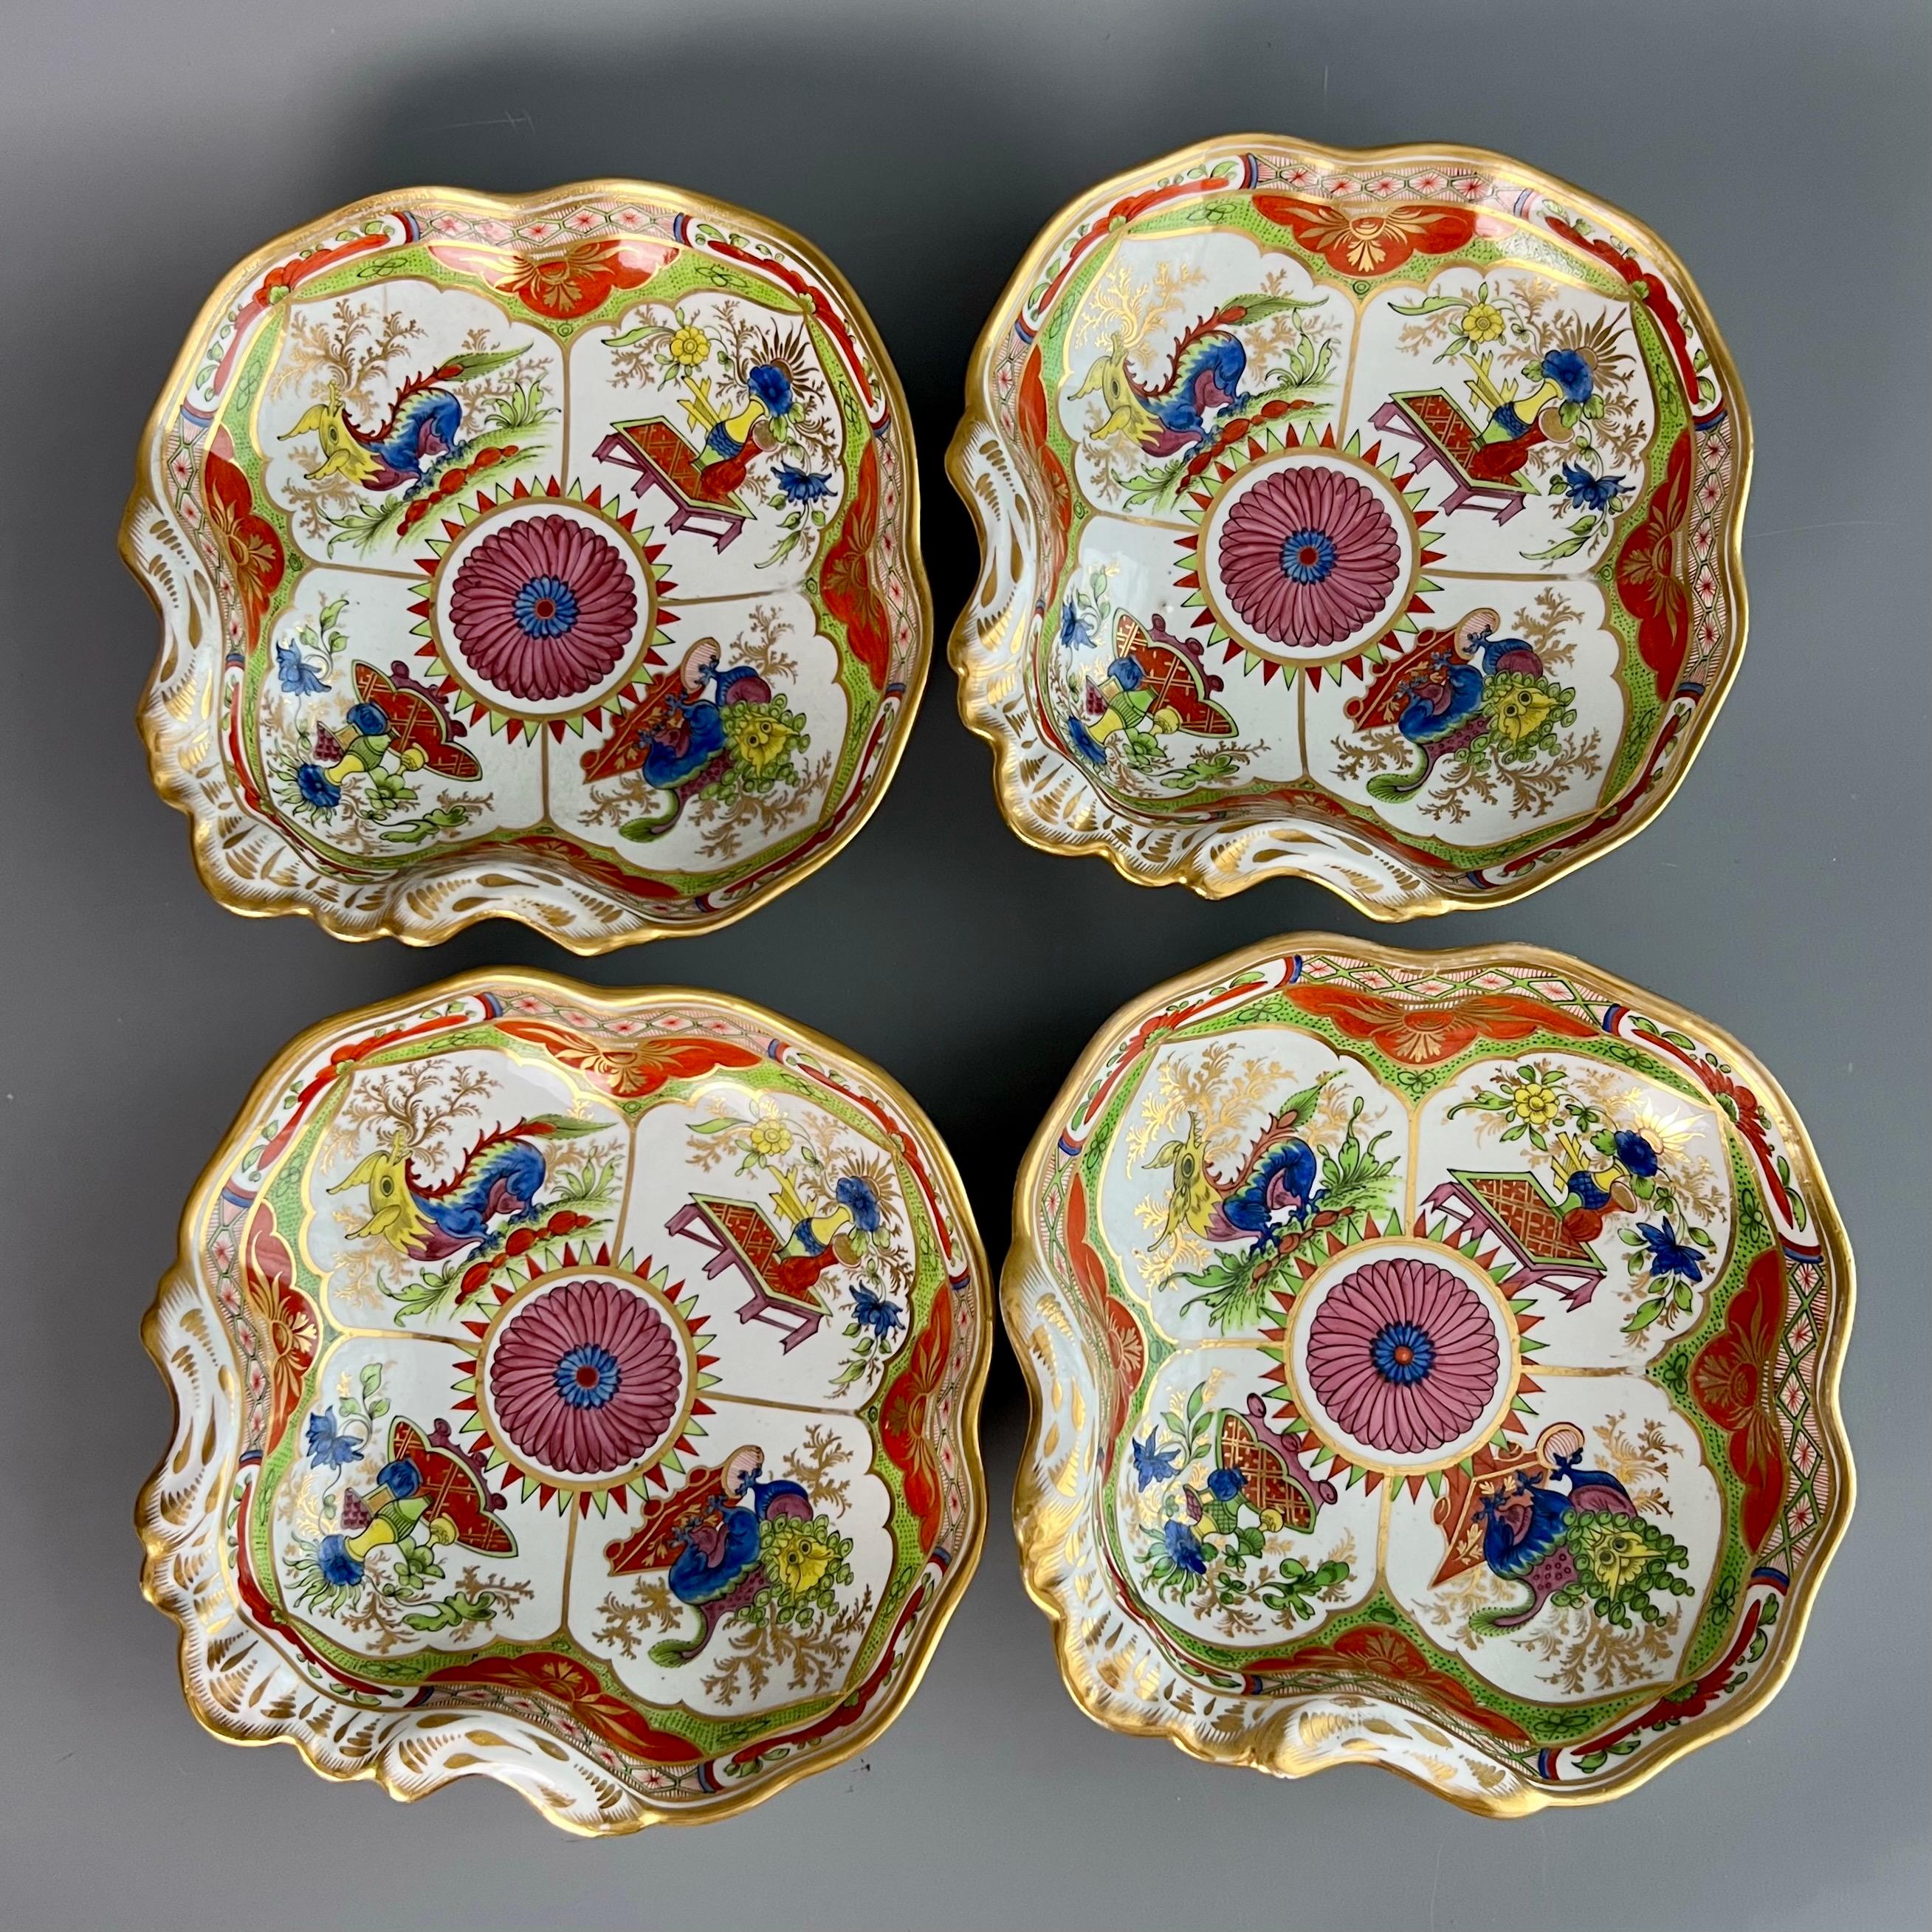 Chamberlain's Worcester Dessert Service Kylin / Dragons in Compartments, ca 1795 1